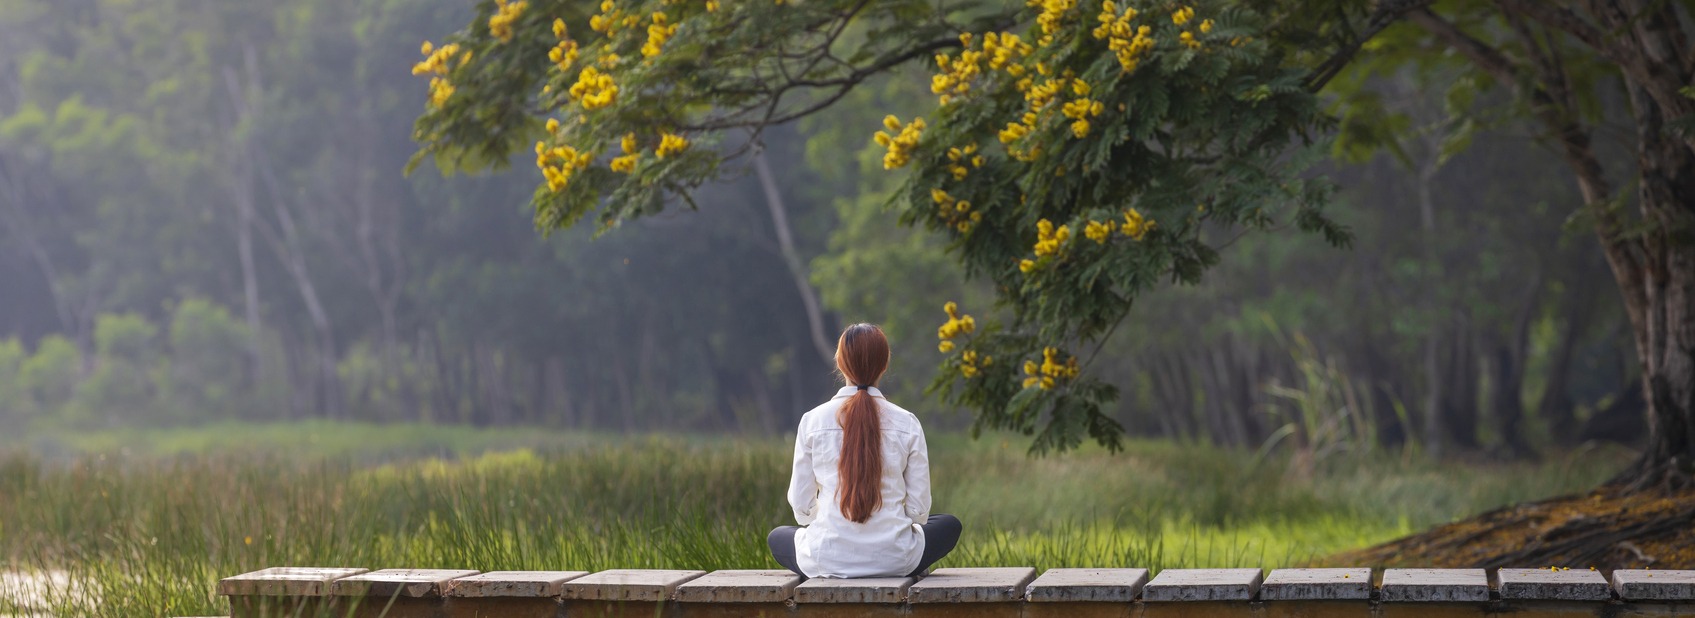 How You Can Reconnect with Nature and Have More Inner Peace